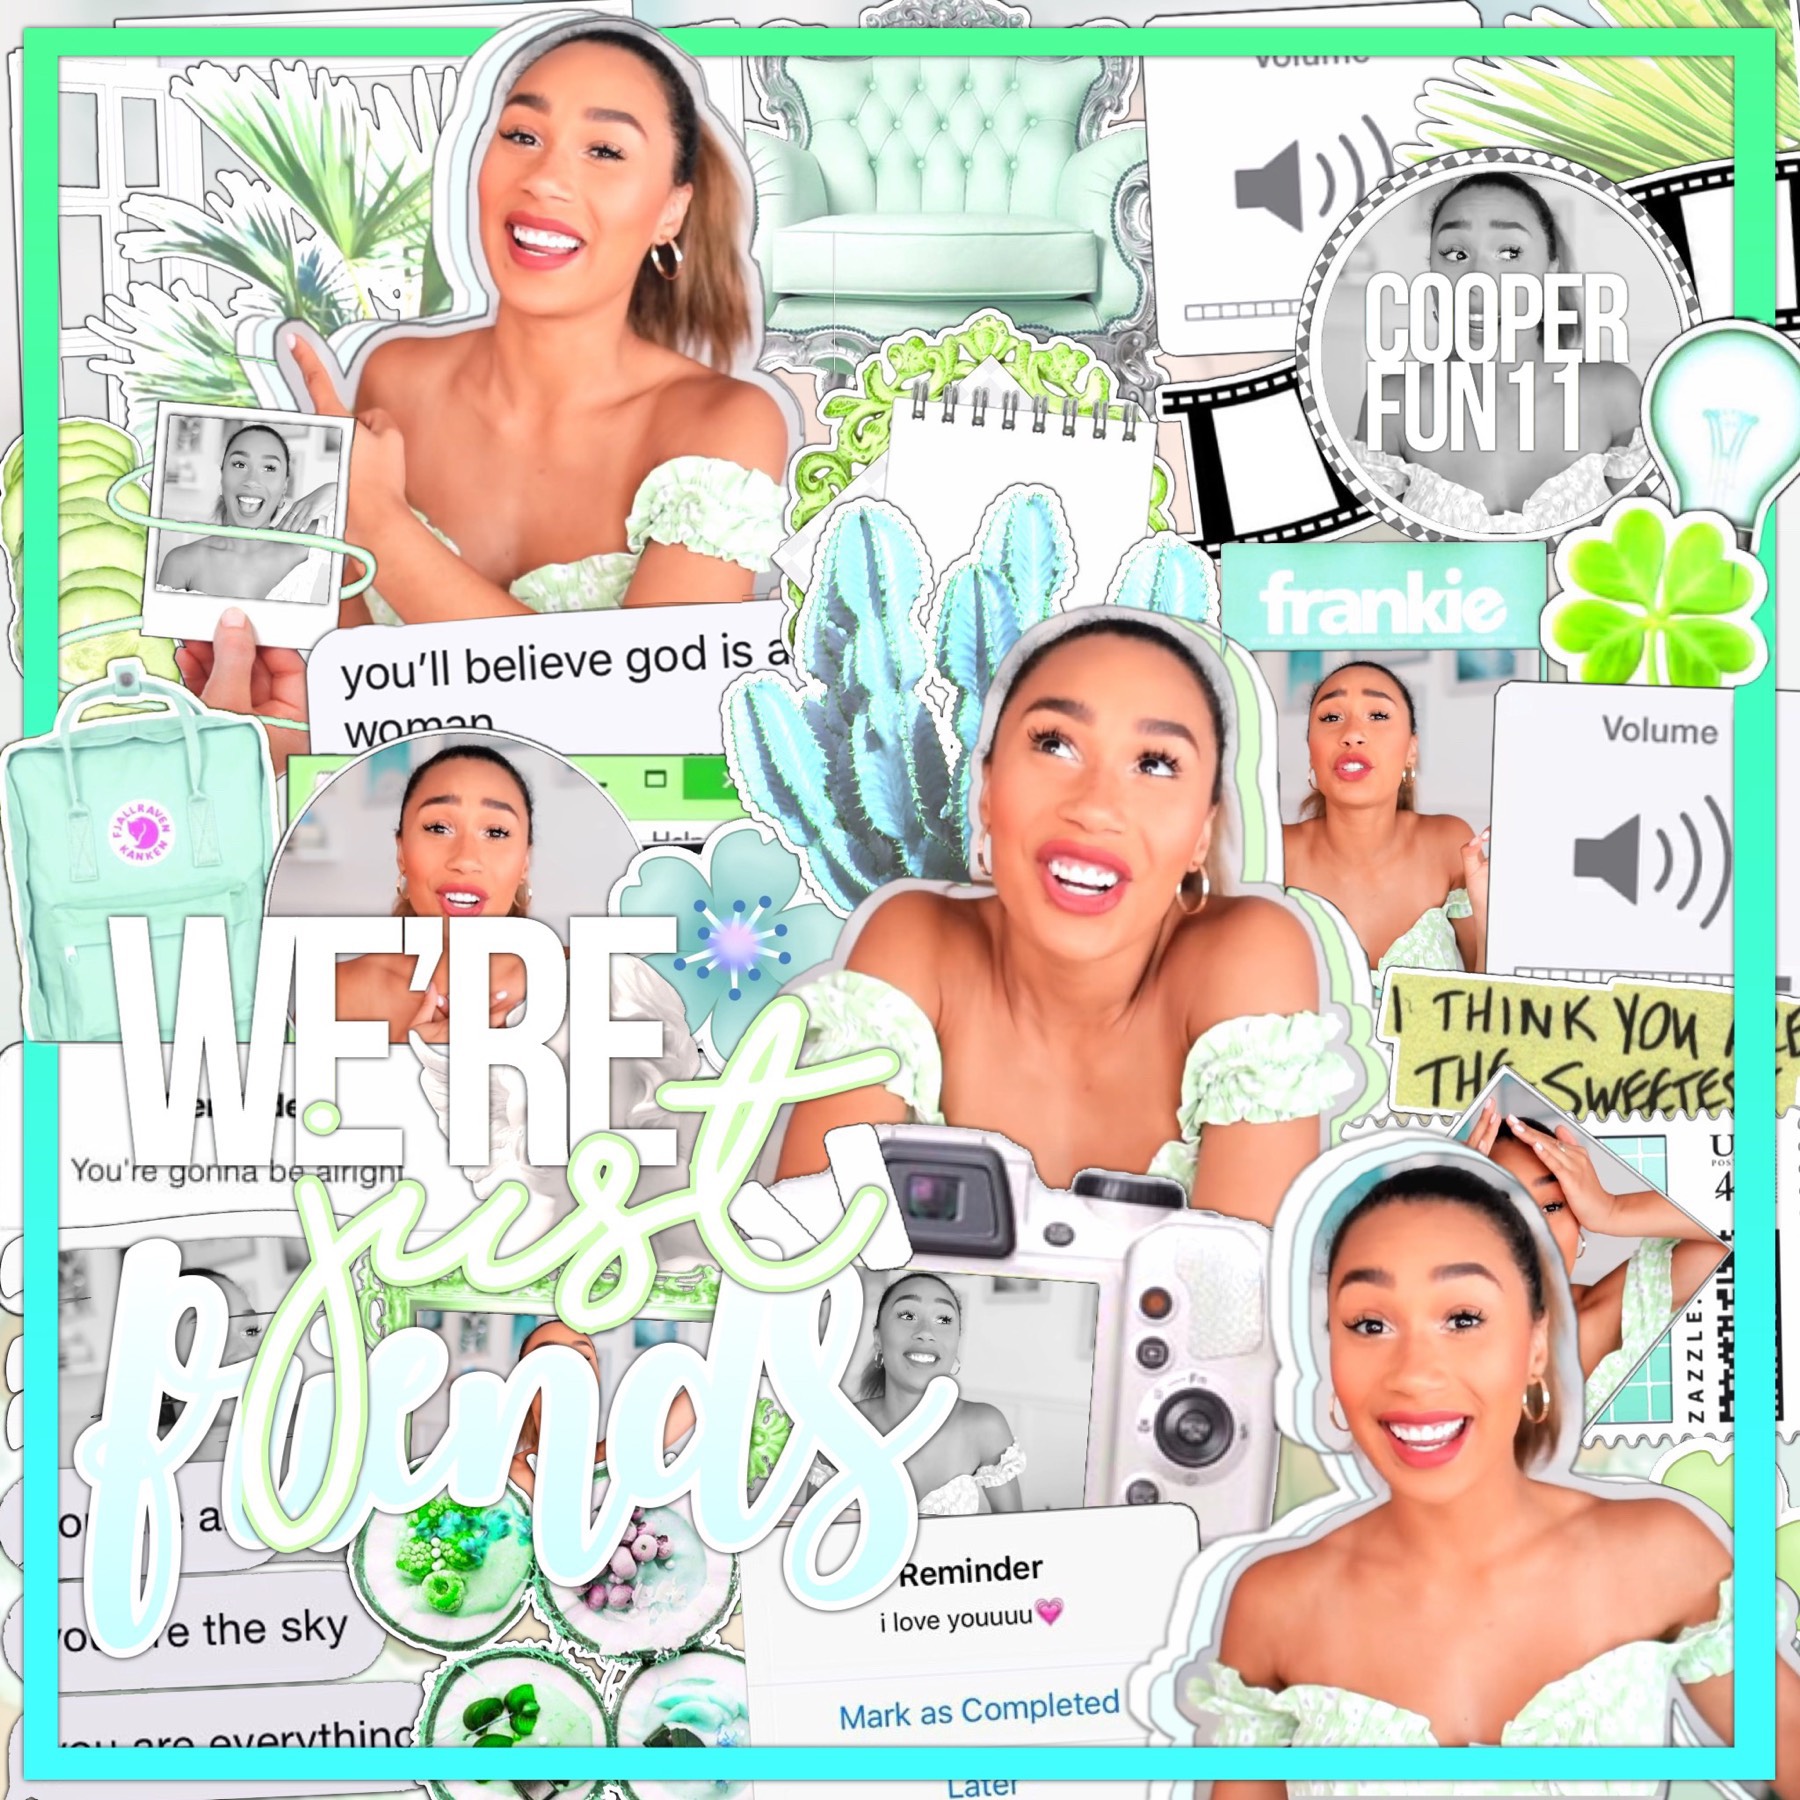 happy thursday!! 🌴 I love this edit so much. I learned from kelli how to form my edit for specific text placement!☺️ what are your weekend plans?🥑 I’m going to clean my MESS of a room!😂🥝